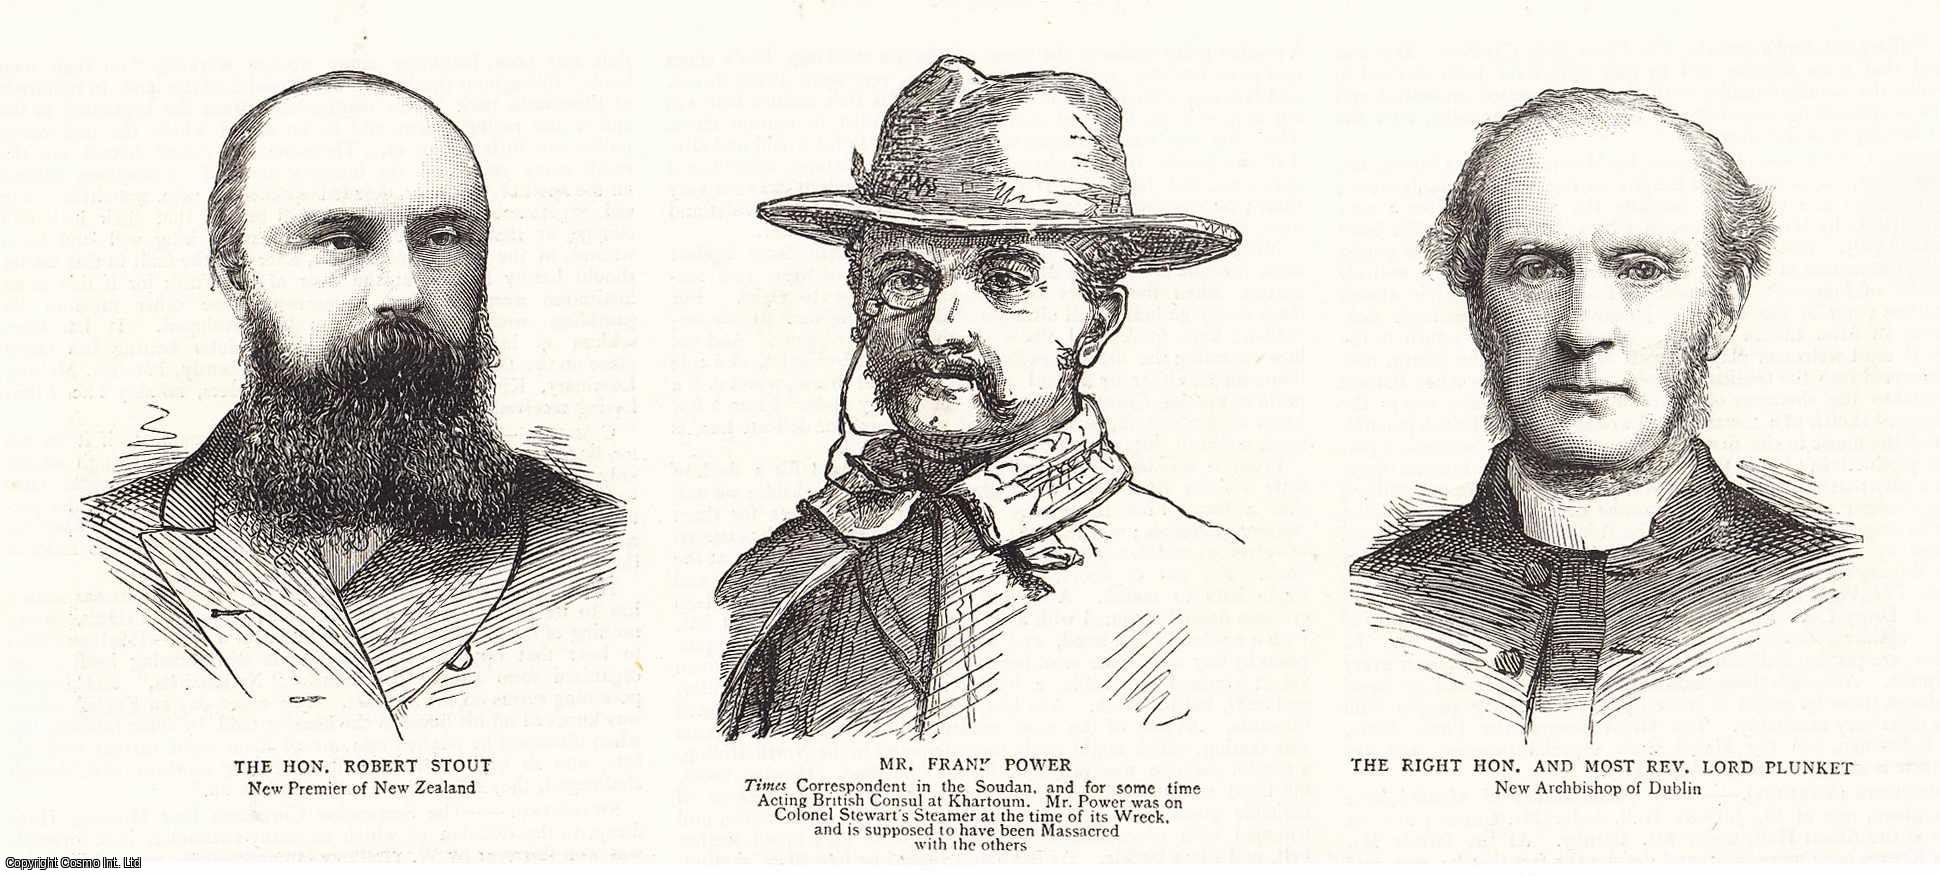 Portraits - The Hon, Robert Stout, Mr Frank Power, Times Correspondent in Soudan and Lord Plunket Archbishop of Dublin; three vignettes. An original print from the Graphic Illustrated Weekly Magazine, 1885.